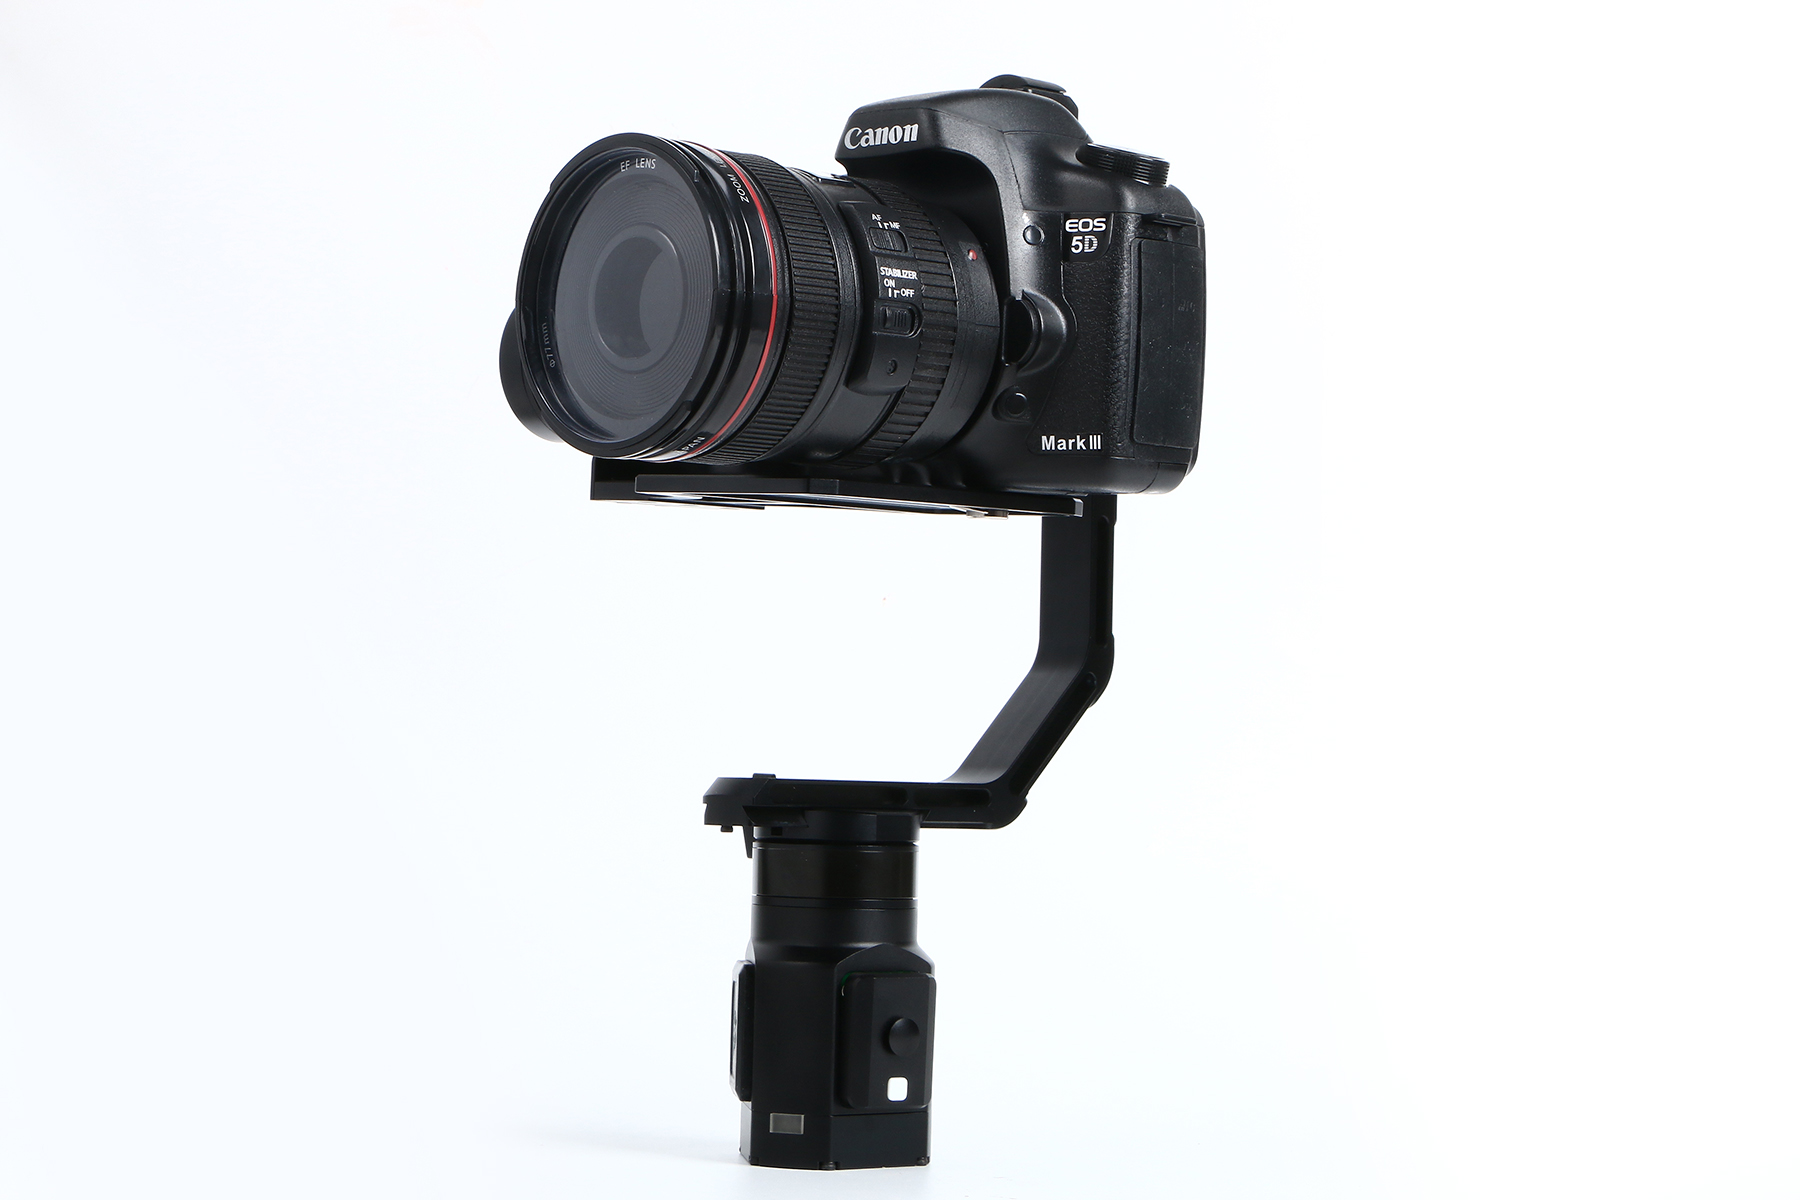 Ti 3-Axis Gimbal Handheld Stabilizer for small DSLR Cameras